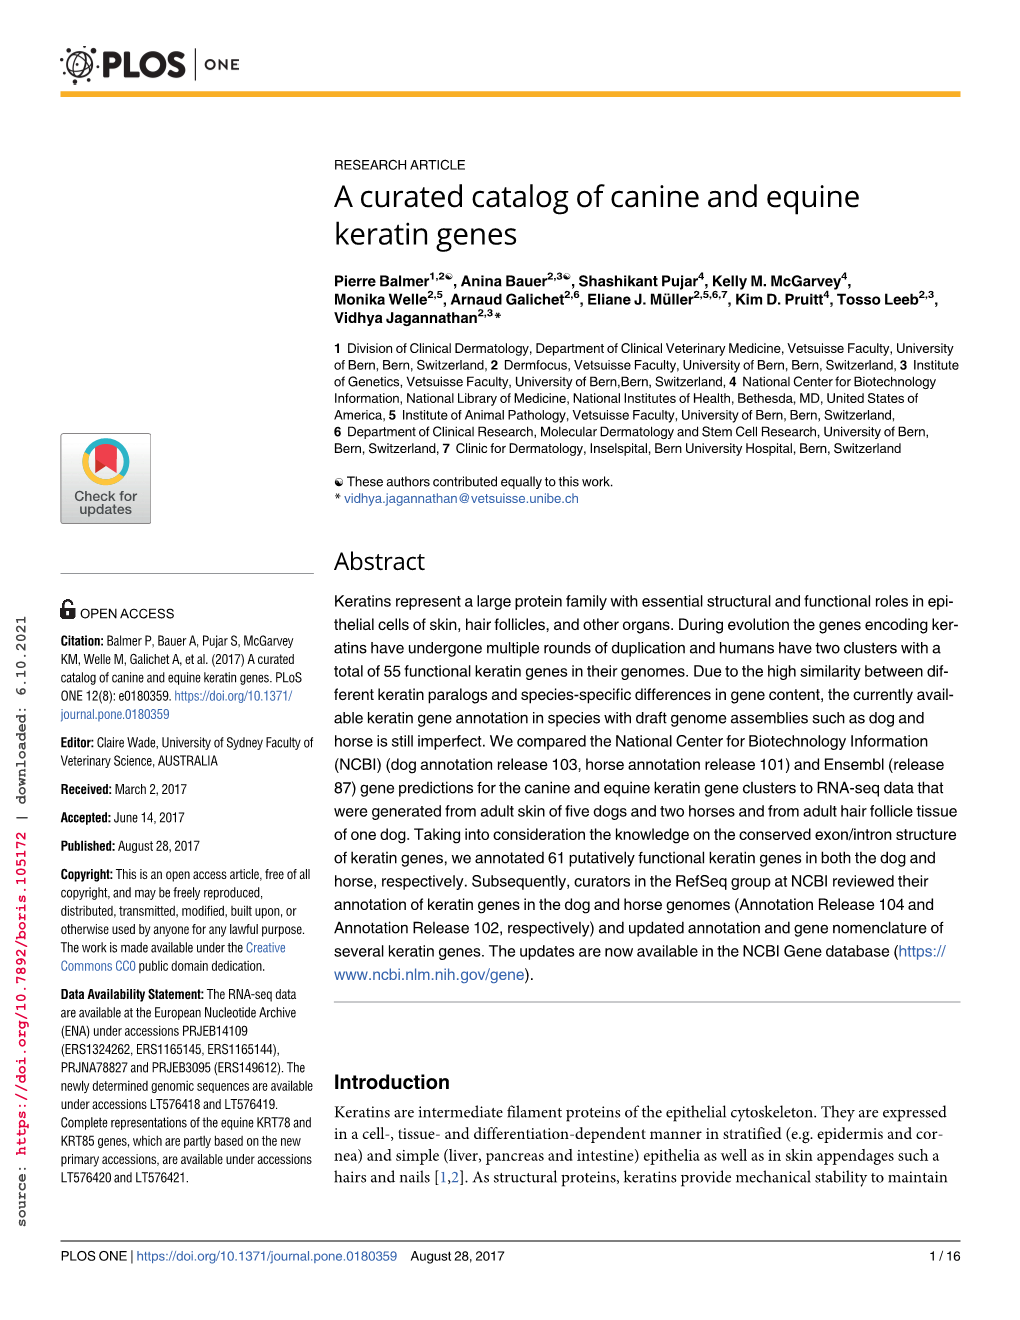 A Curated Catalog of Canine and Equine Keratin Genes